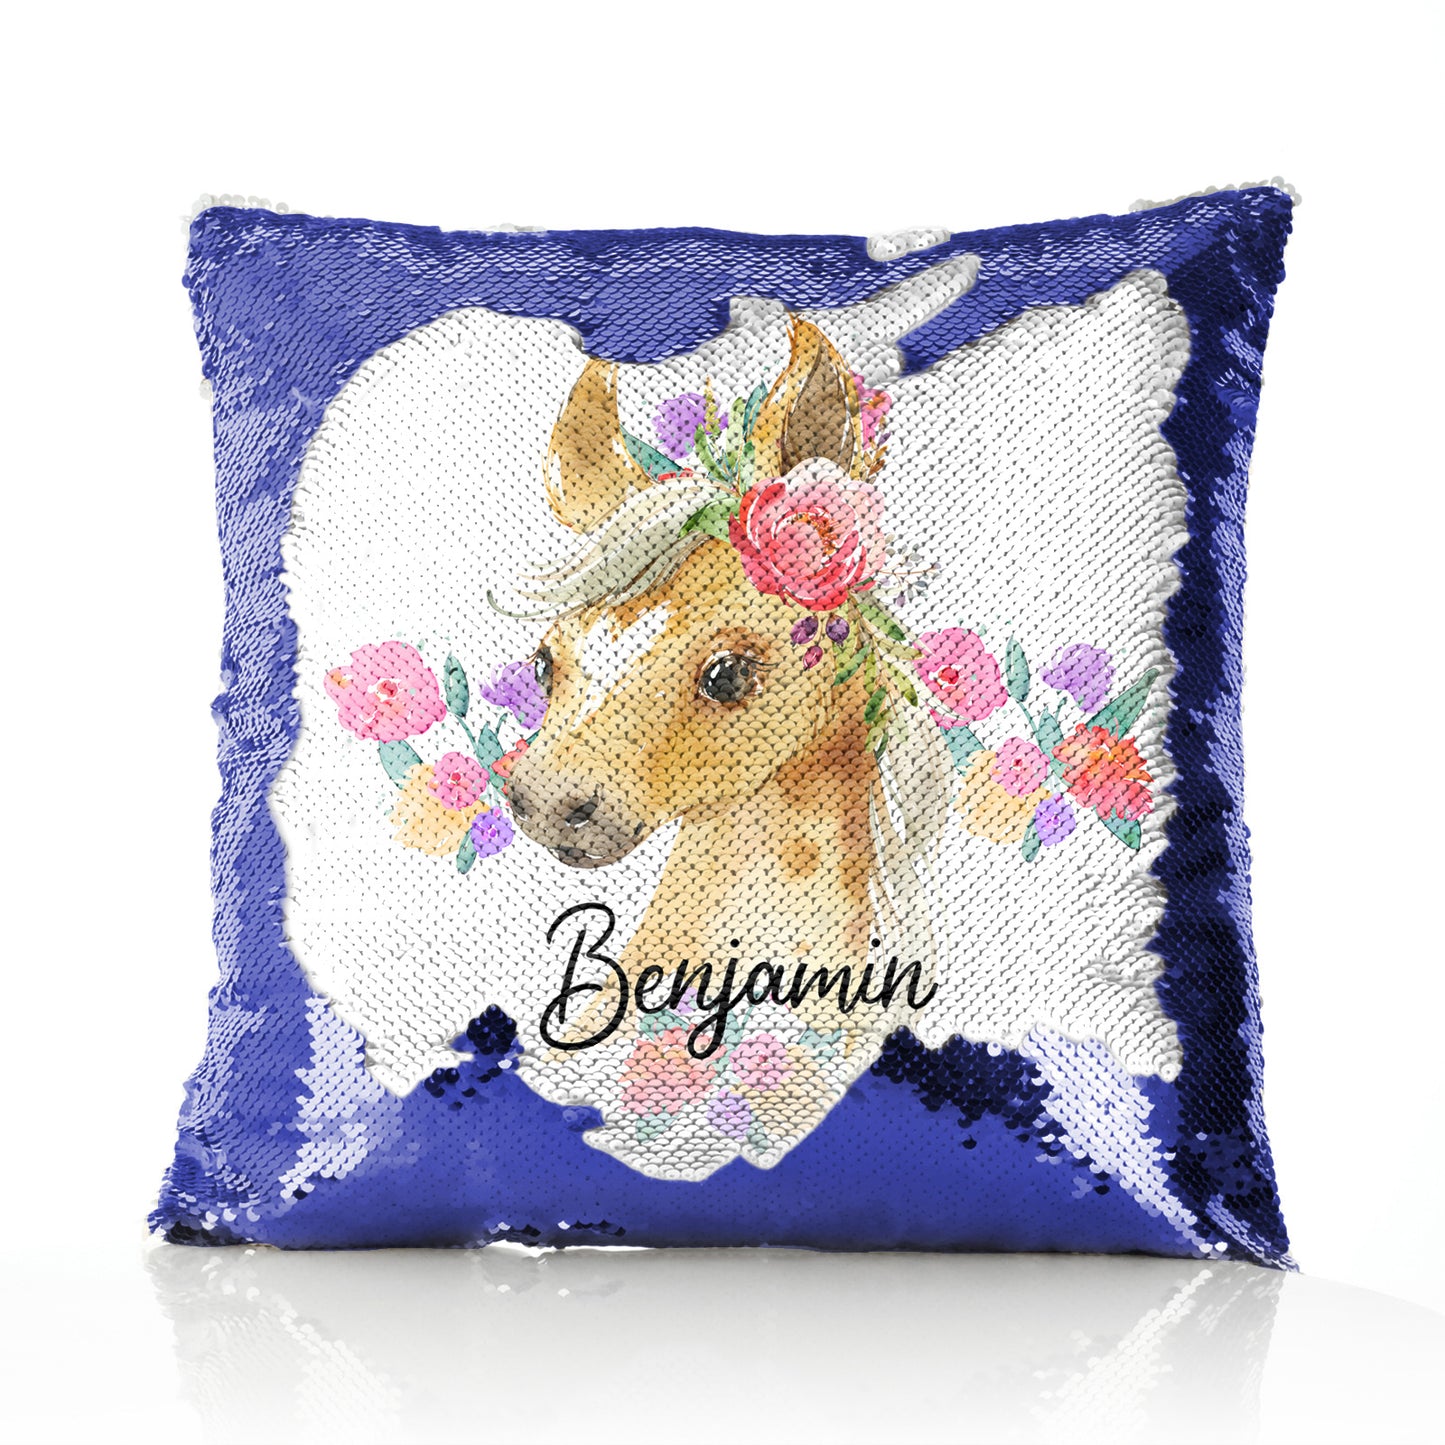 Personalised Sequin Cushion with Palomino Horse Multicolour Flower Print and Cute Text